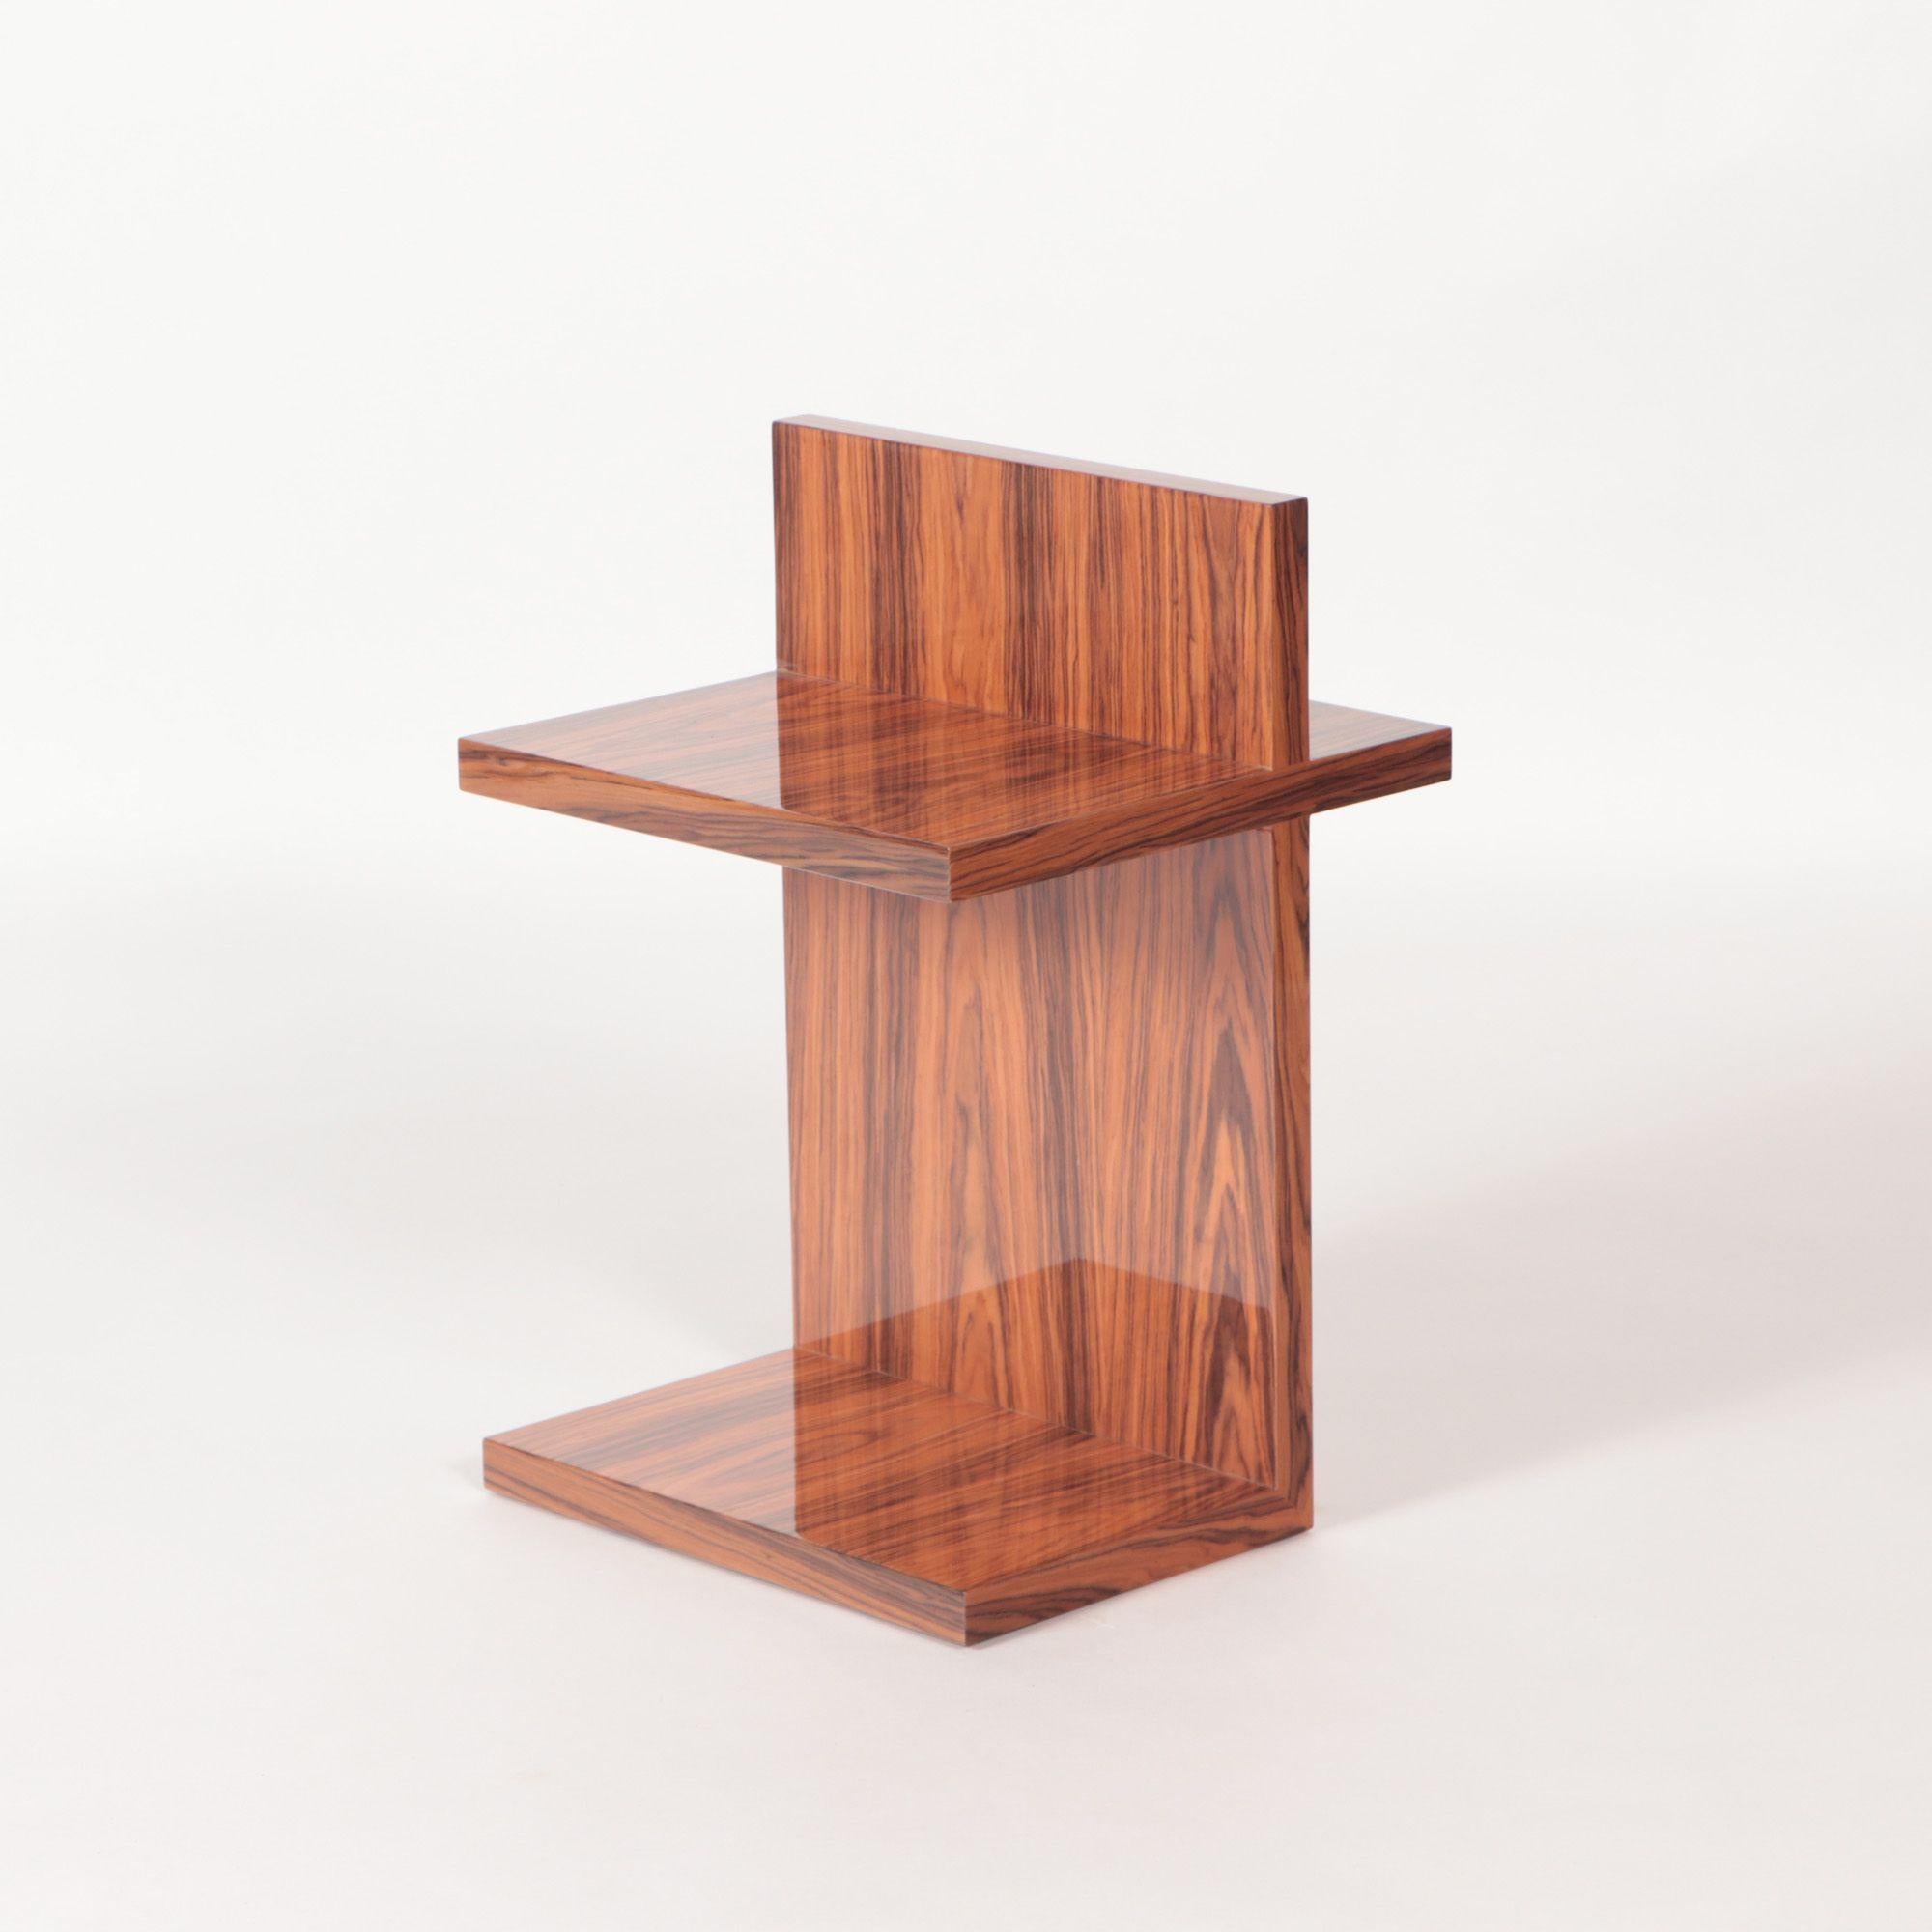 Designed by Maximilian Eicke for his brand Max ID NY.

This minimalistic side table completed with a beautiful French Polished Mahogany Veneer. To give it a mid-century feeling.

Designed as part of its original collection in 2010, the designer